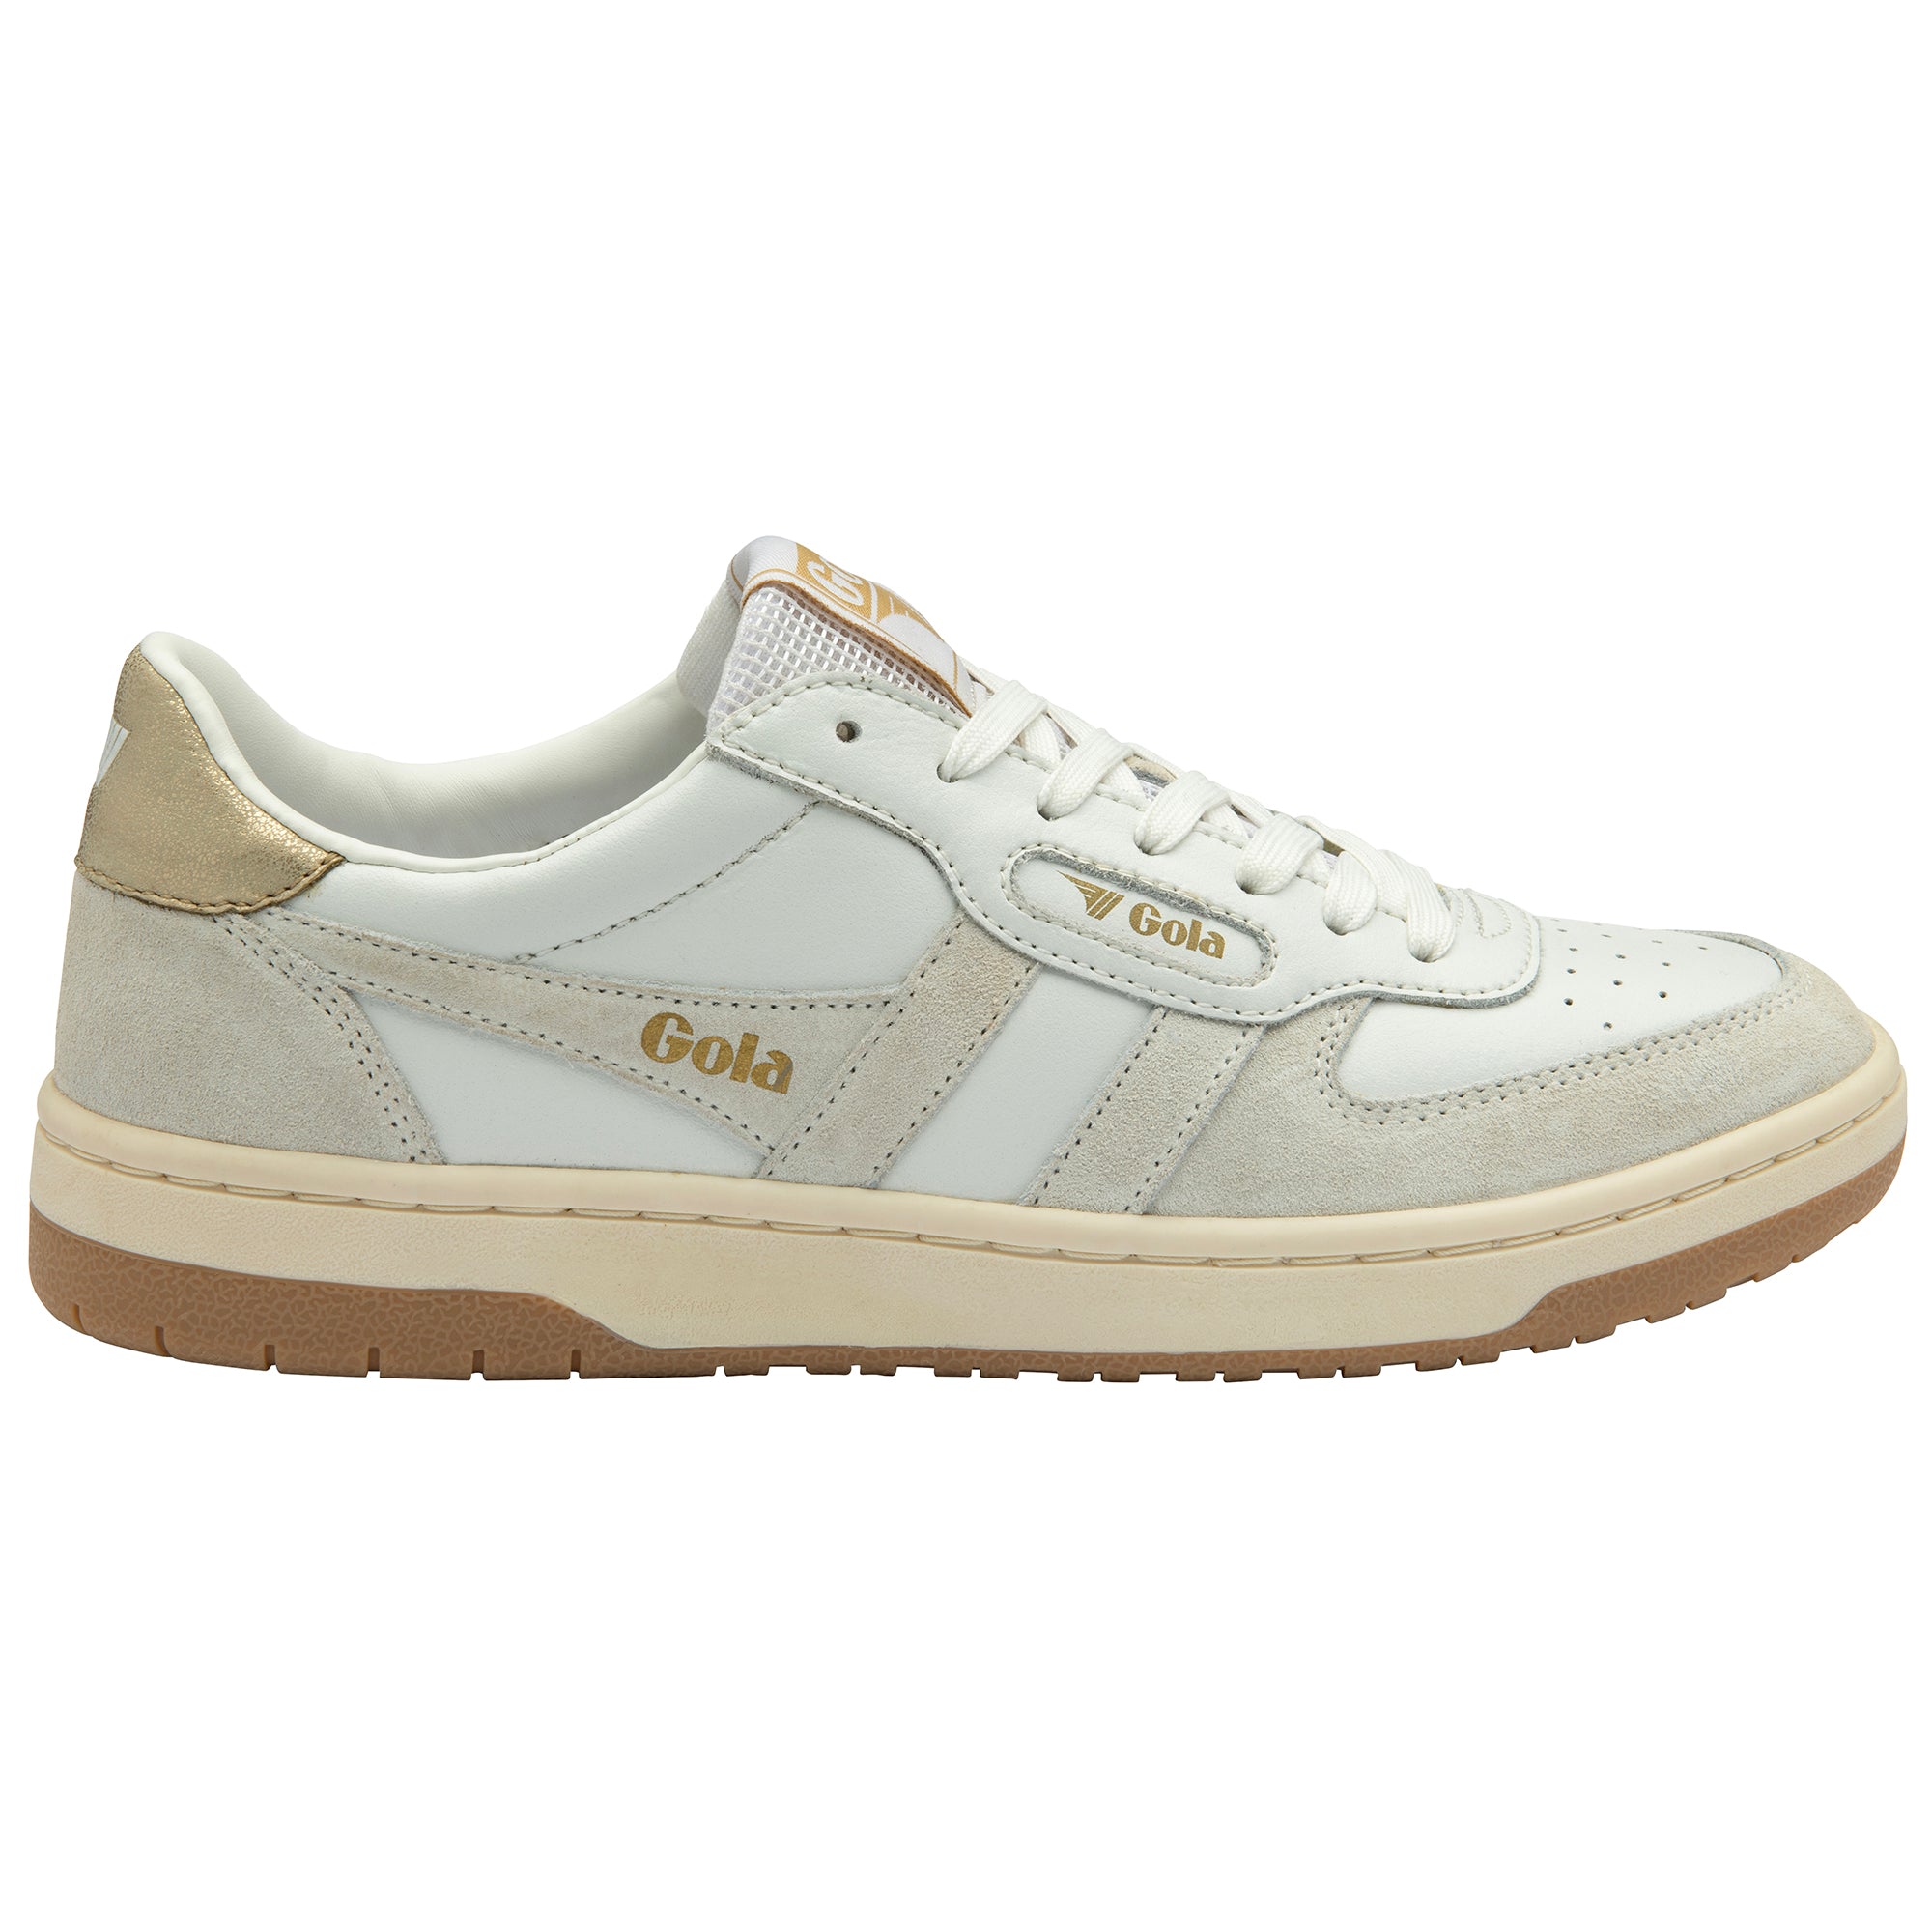 Hawk Sneakers in White/White/Gold